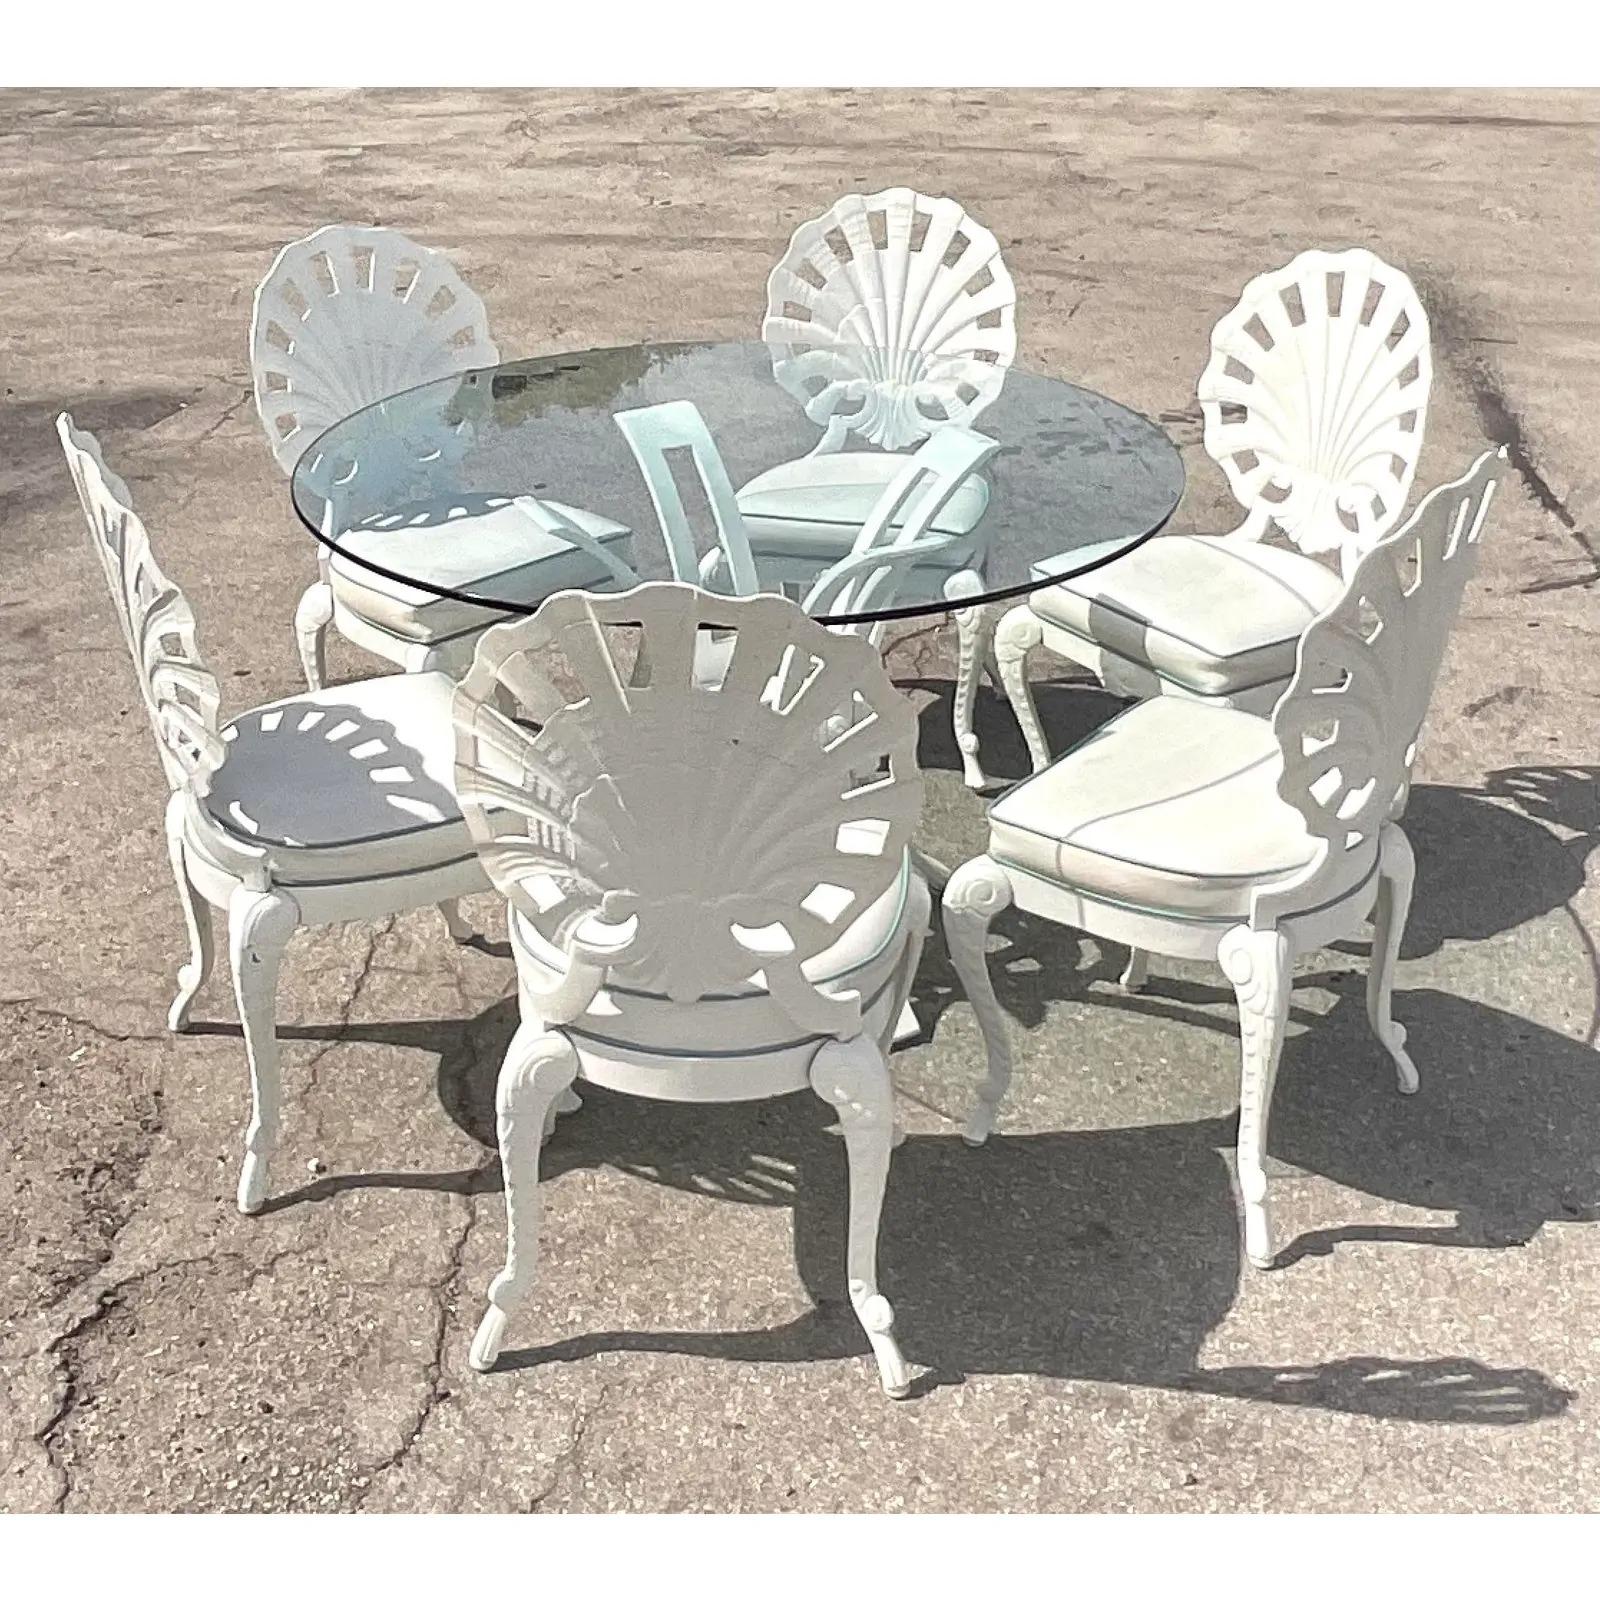 Fantastic set of 6 vintage Regency Cast aluminum outdoor dining chairs. Made by the iconic Tropitone group. Lacquered a high glow white with white seats and blue tipping. Unmarked.